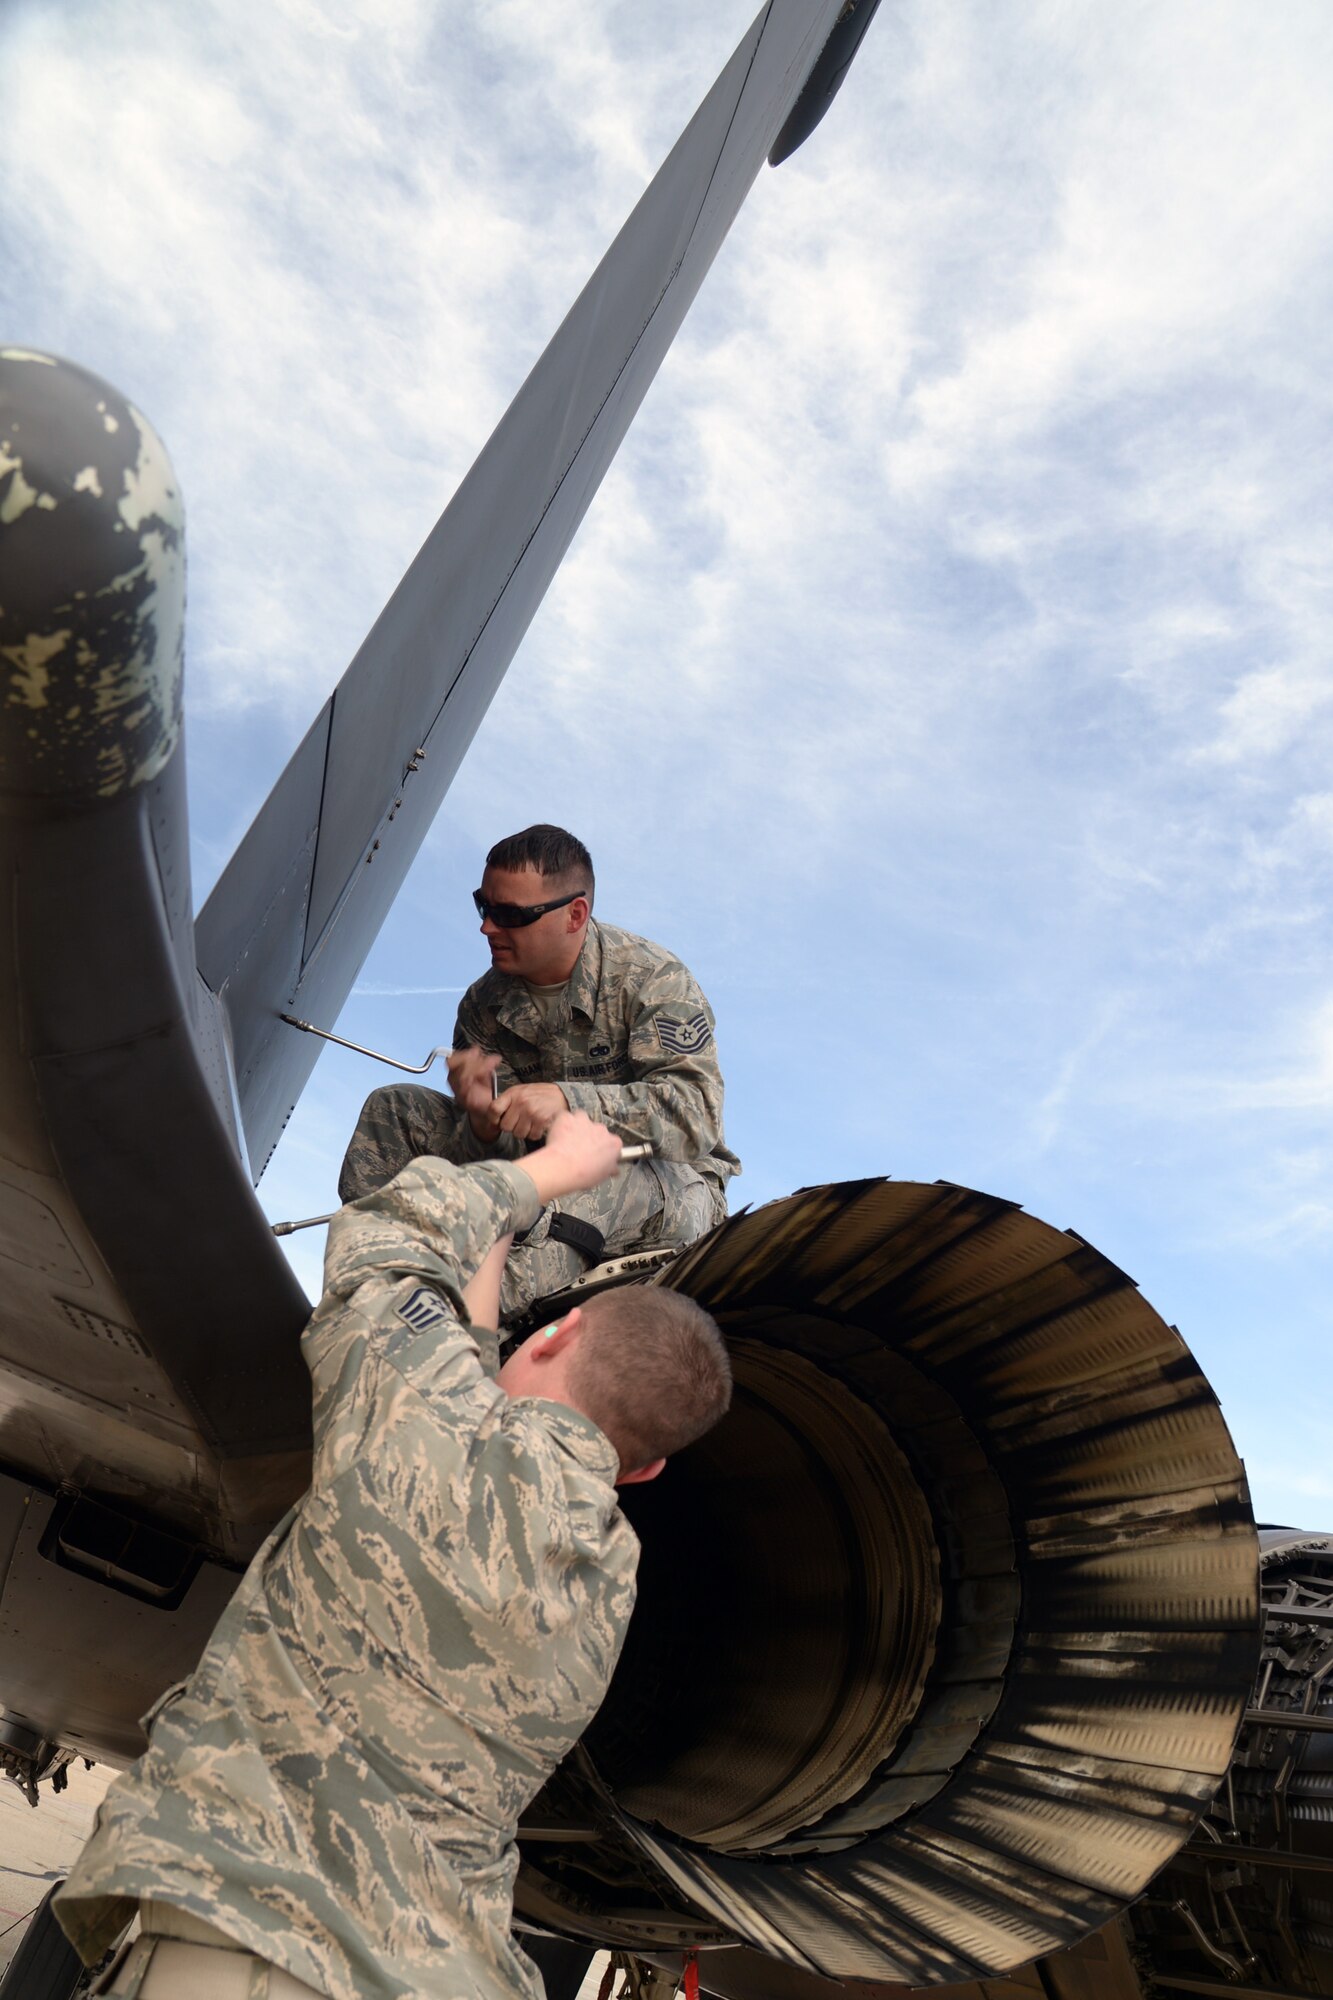 Tech. Sgt. Ben Mahan, above, and Staff Sgt. Bradley Duncan, 336th Aircraft Maintenance Unit avionics technicians from Seymour Johnson Air Force Base, North Carolina, perform maintenance on an F-15E Strike Eagle aircraft, May 4, 2016, at Hill AFB, Utah. More than 40 combat aircraft participated in the U.S. Air Force air-to-ground weapons evaluation known as Combat Hammer including: F-15Es from Seymour Johnson AFB, N.C.; A-10s from Davis-Monthan AFB, N.M.; F-16s from Hill AFB and Tucson Air National Guard Base, Arizona; B-1s from Dyess AFB, Texas; and B-52s from Minot AFB, N.D. The fighter units deployed to Hill AFB, while bomber units participated from their home stations. (U.S. Air Force photo by Paul Holcomb)